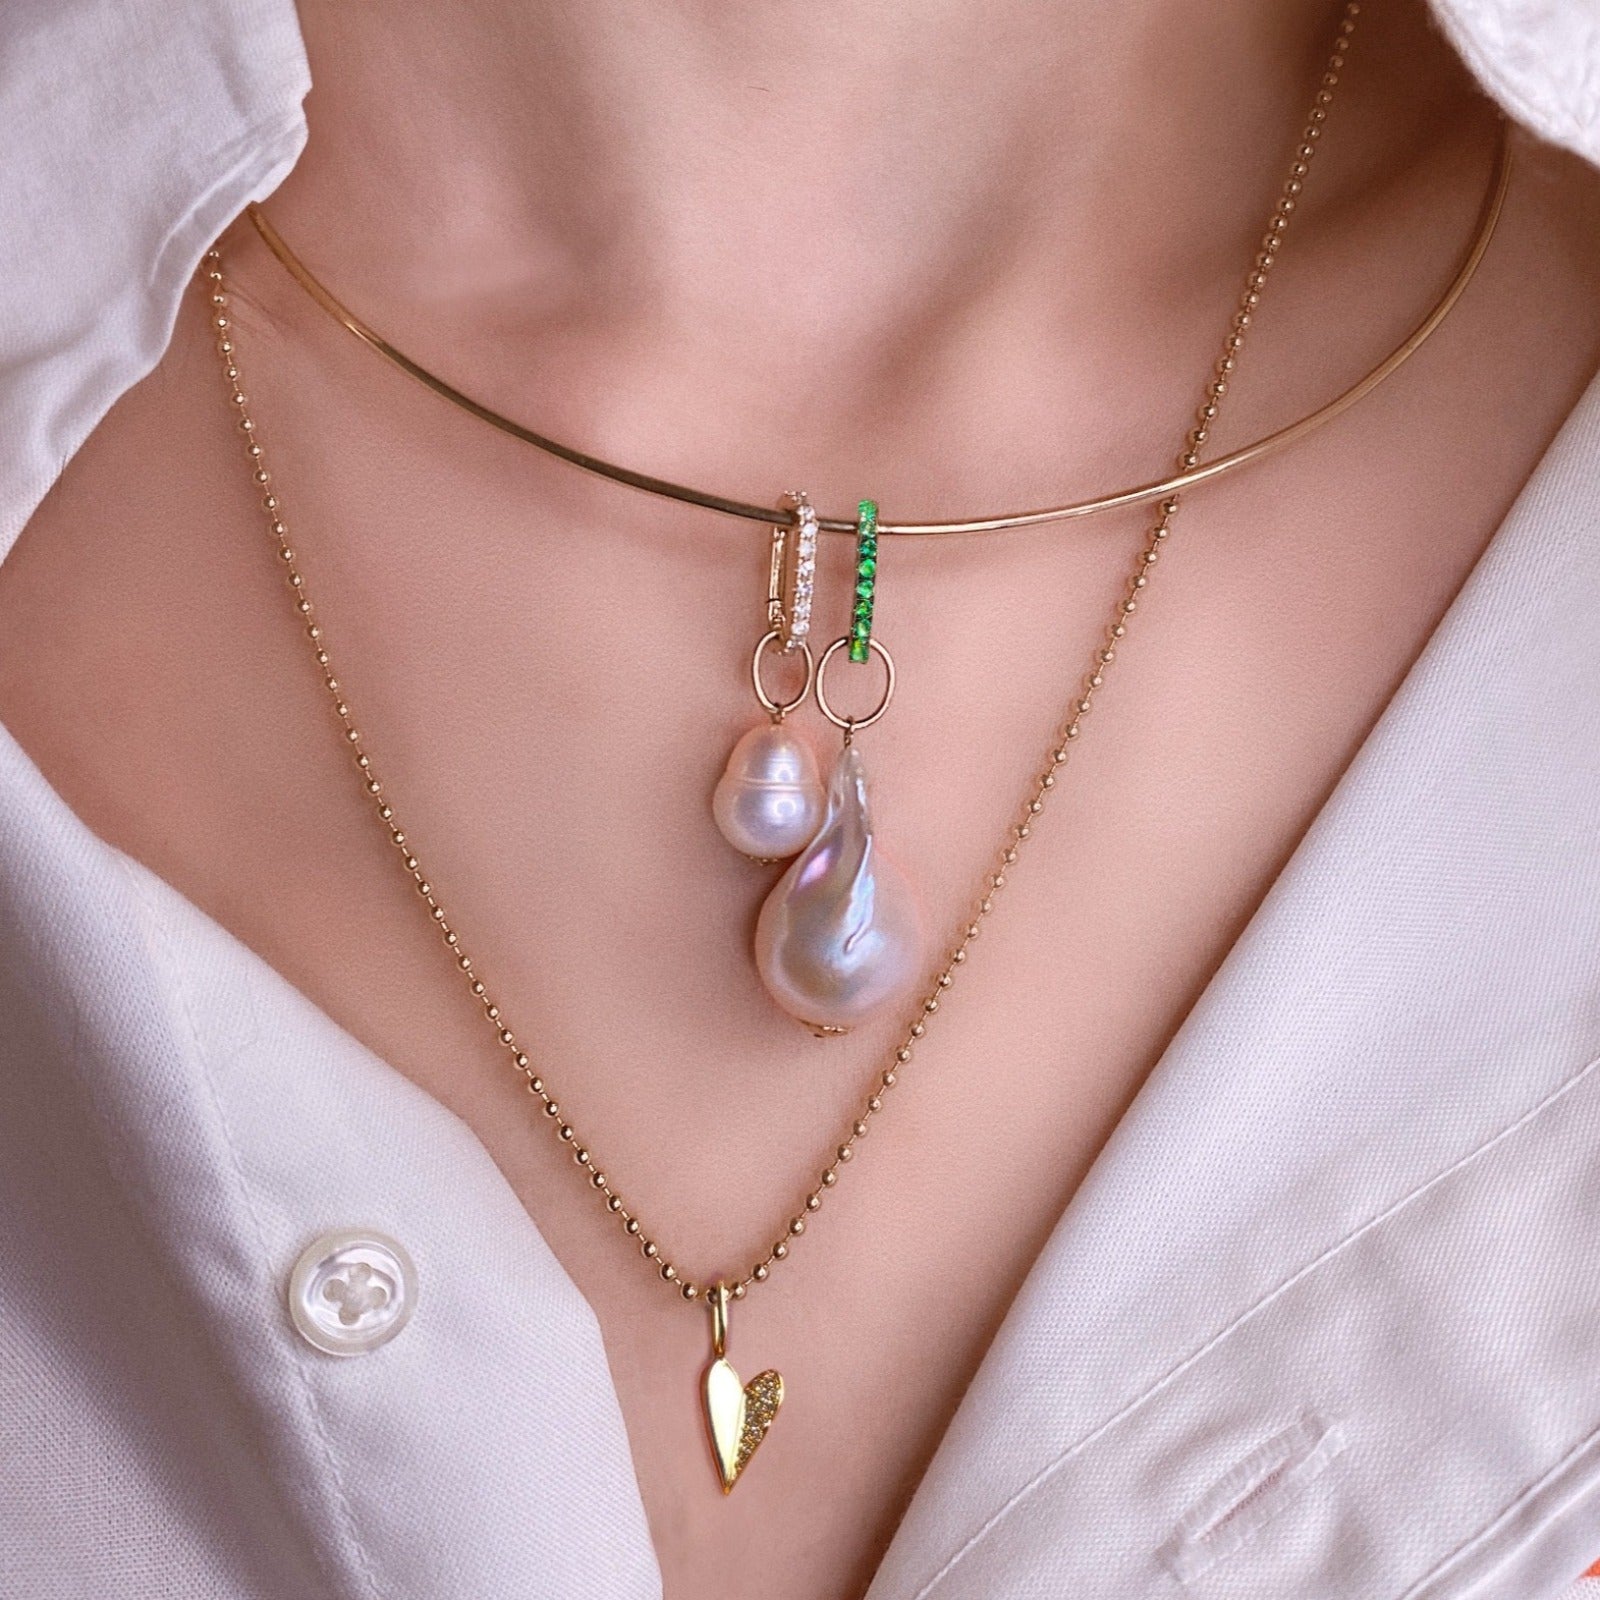 14k yellow gold oval locking charm with green stones styled on a neck locked on a wire choker necklace and mini baroque pearl charm.